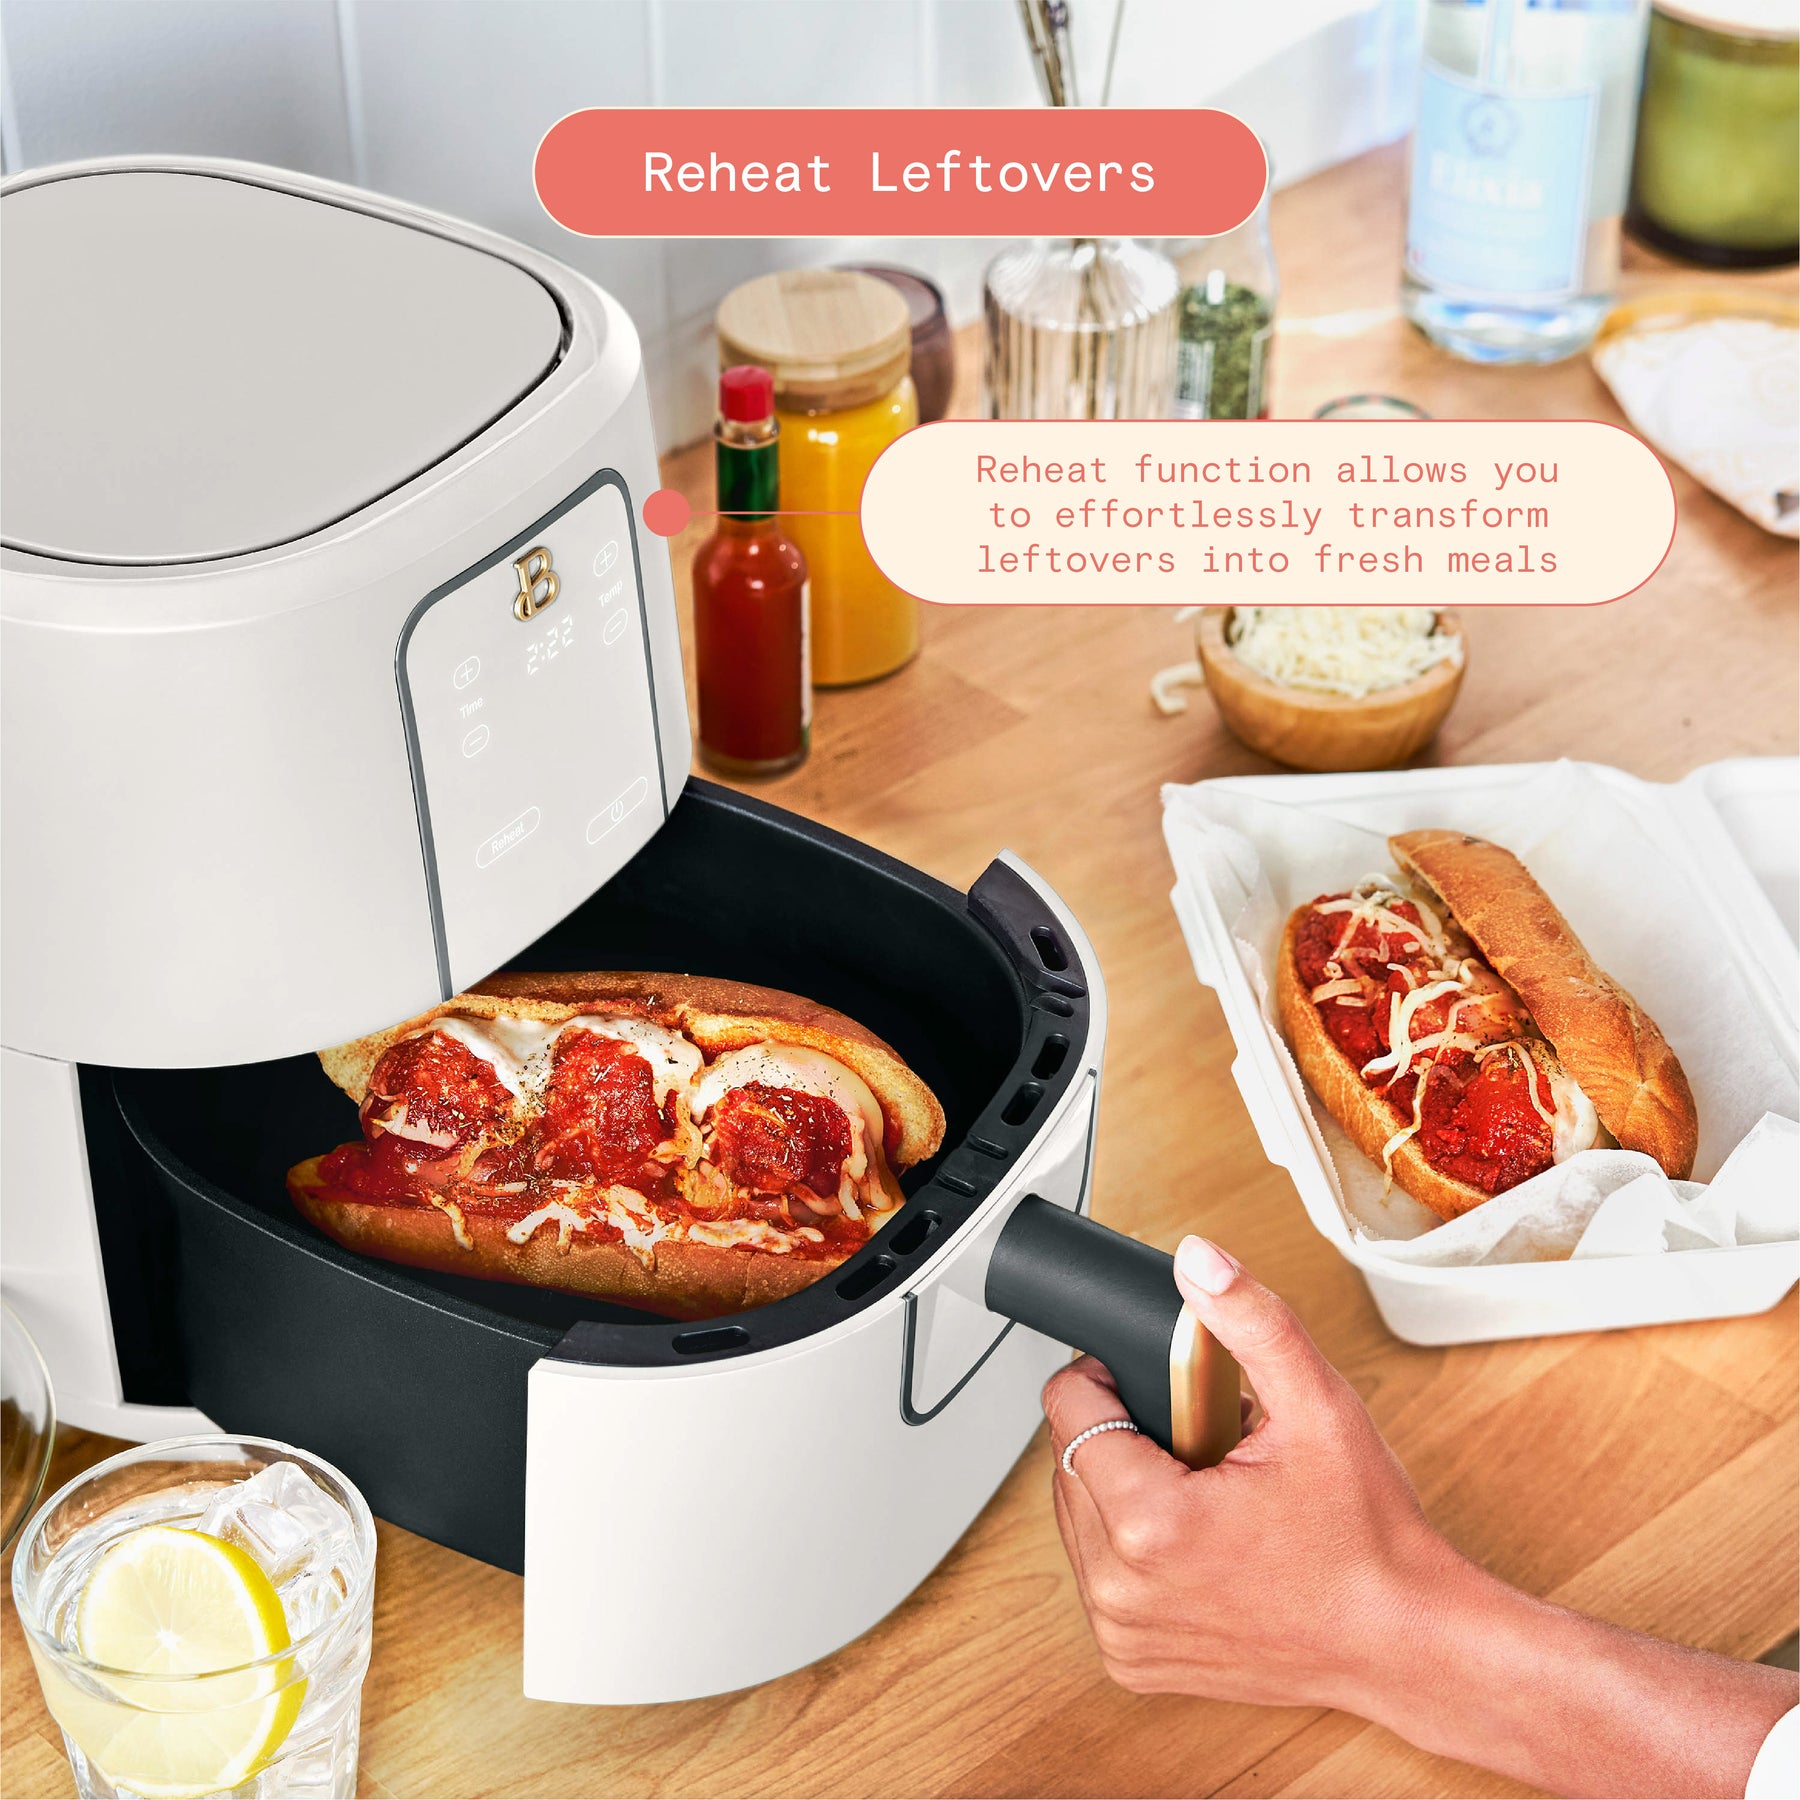 Beautiful 3 Qt Air Fryer with TurboCrisp Technology, Limited Edition Merlot  by Drew Barrymore